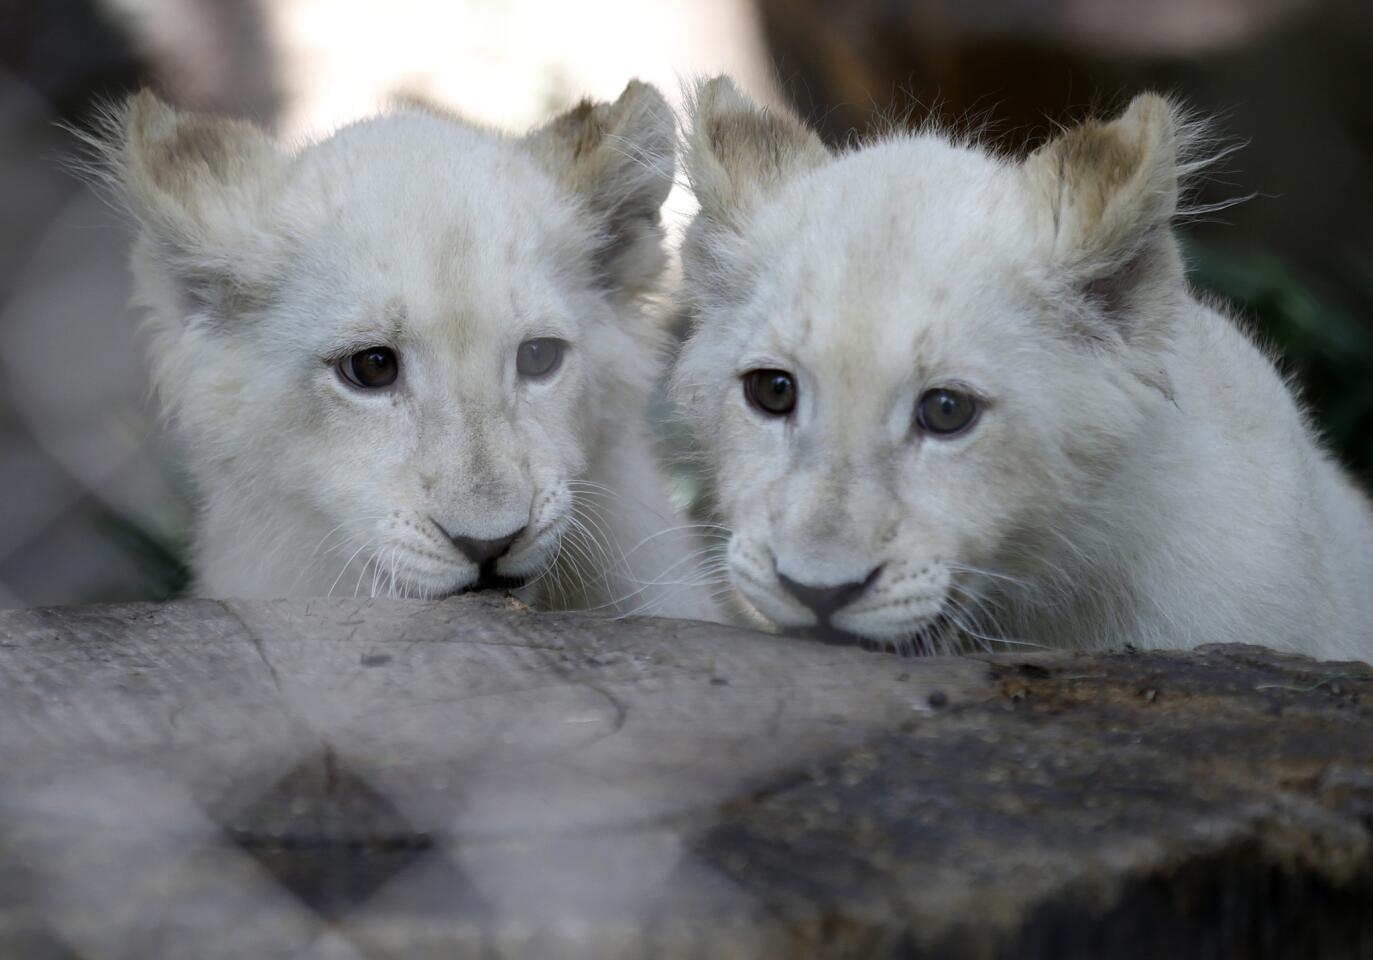 White lion cubs at Siegfried & Roy’s Secret Garden and Dolphin Habitat at the Mirage.